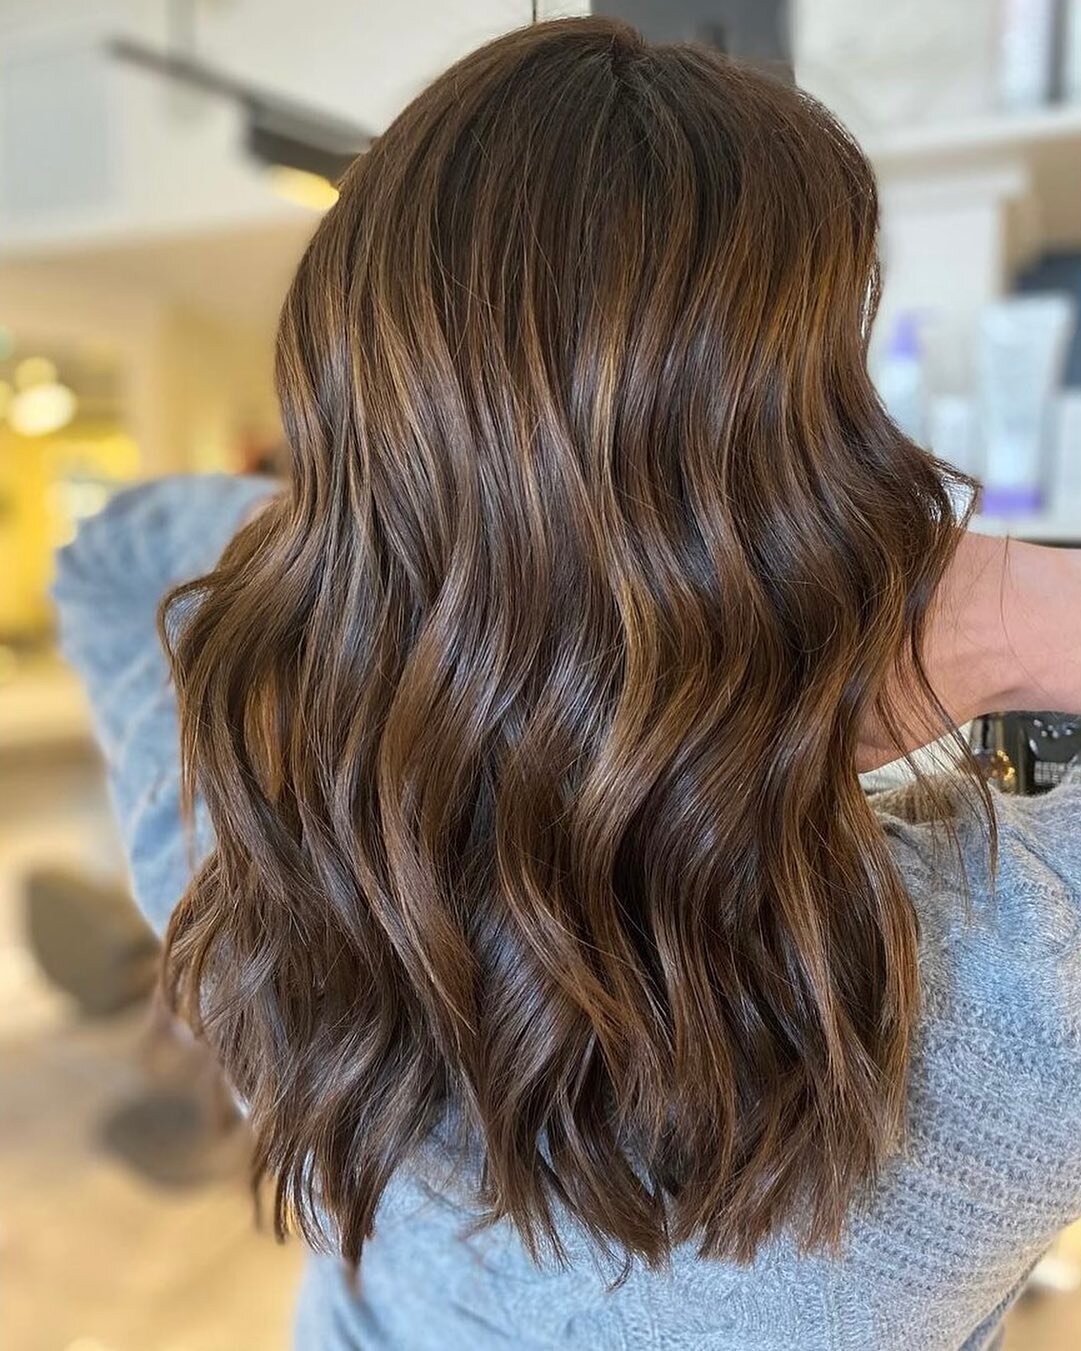 Meeting new clients and spending time creating your dream hair gets us so excited✨

Taking time to have a thorough consultation allows your stylist to:
- Learn about your hair history
- Your hair goals 
- Type of activities &amp; sports you partake i